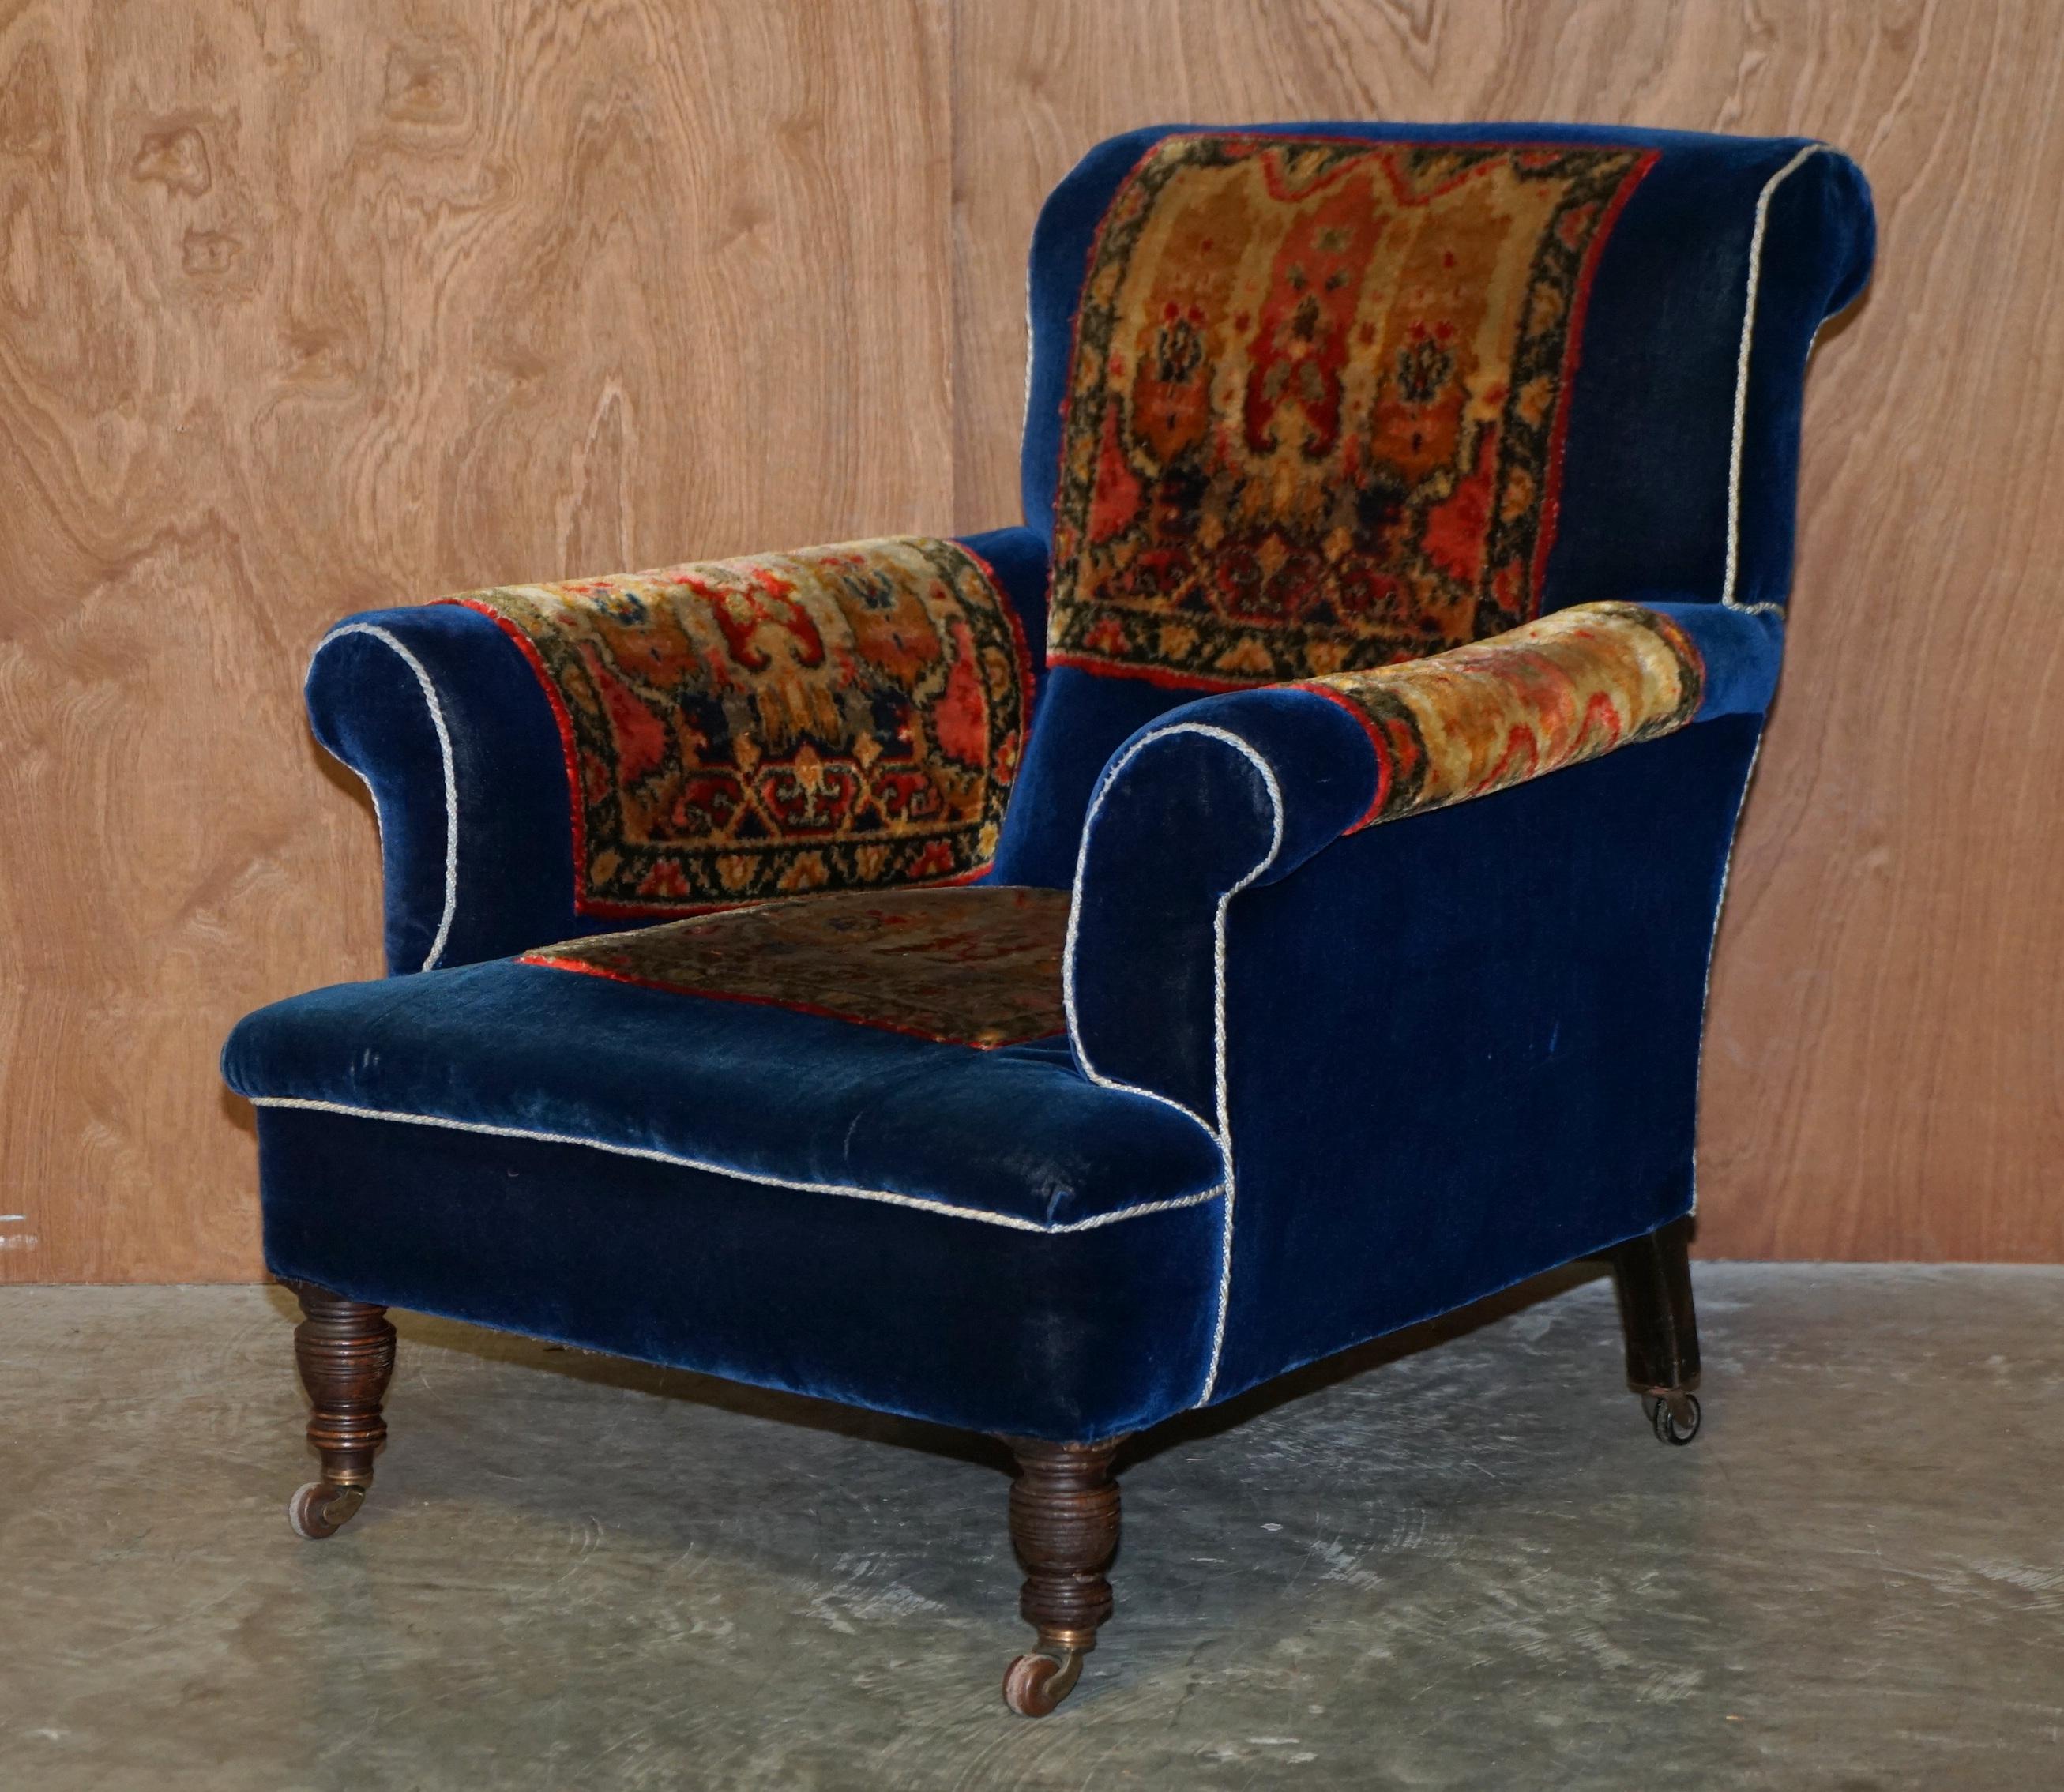 We are delighted to offer this very rare and highly collectable original his and hers pair of Victorian mahogany framed country house club armchairs with Napoleonic blue bordered Turkey Kilim Rug upholstery which are part of a suite

These are